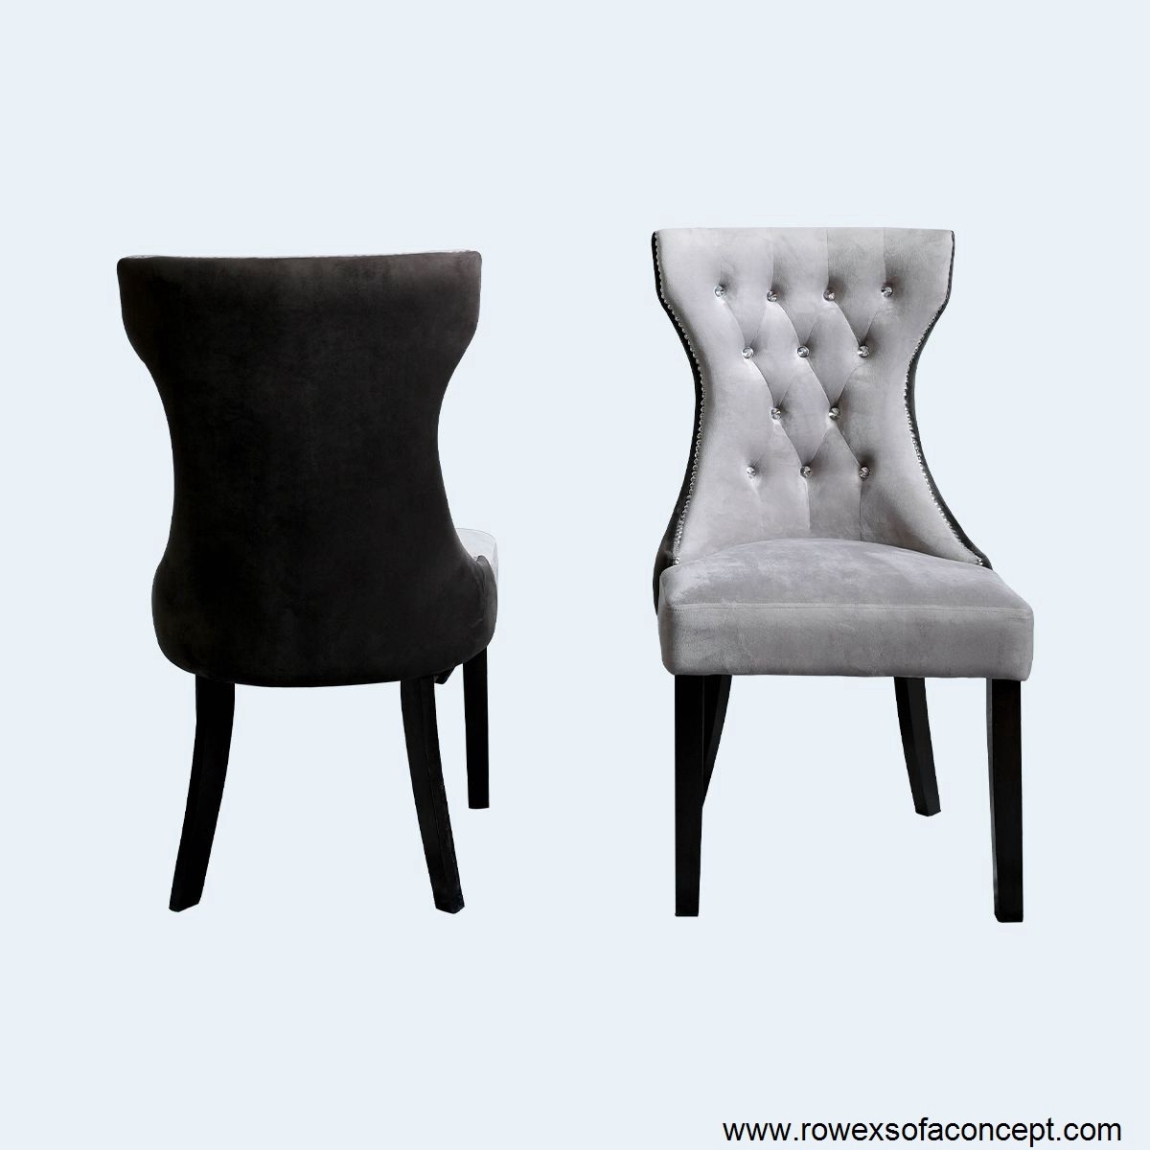 Rowex Luxury Dining Chair - 01 Dining Chair Dining Furniture Choose Sample / Pattern Chart